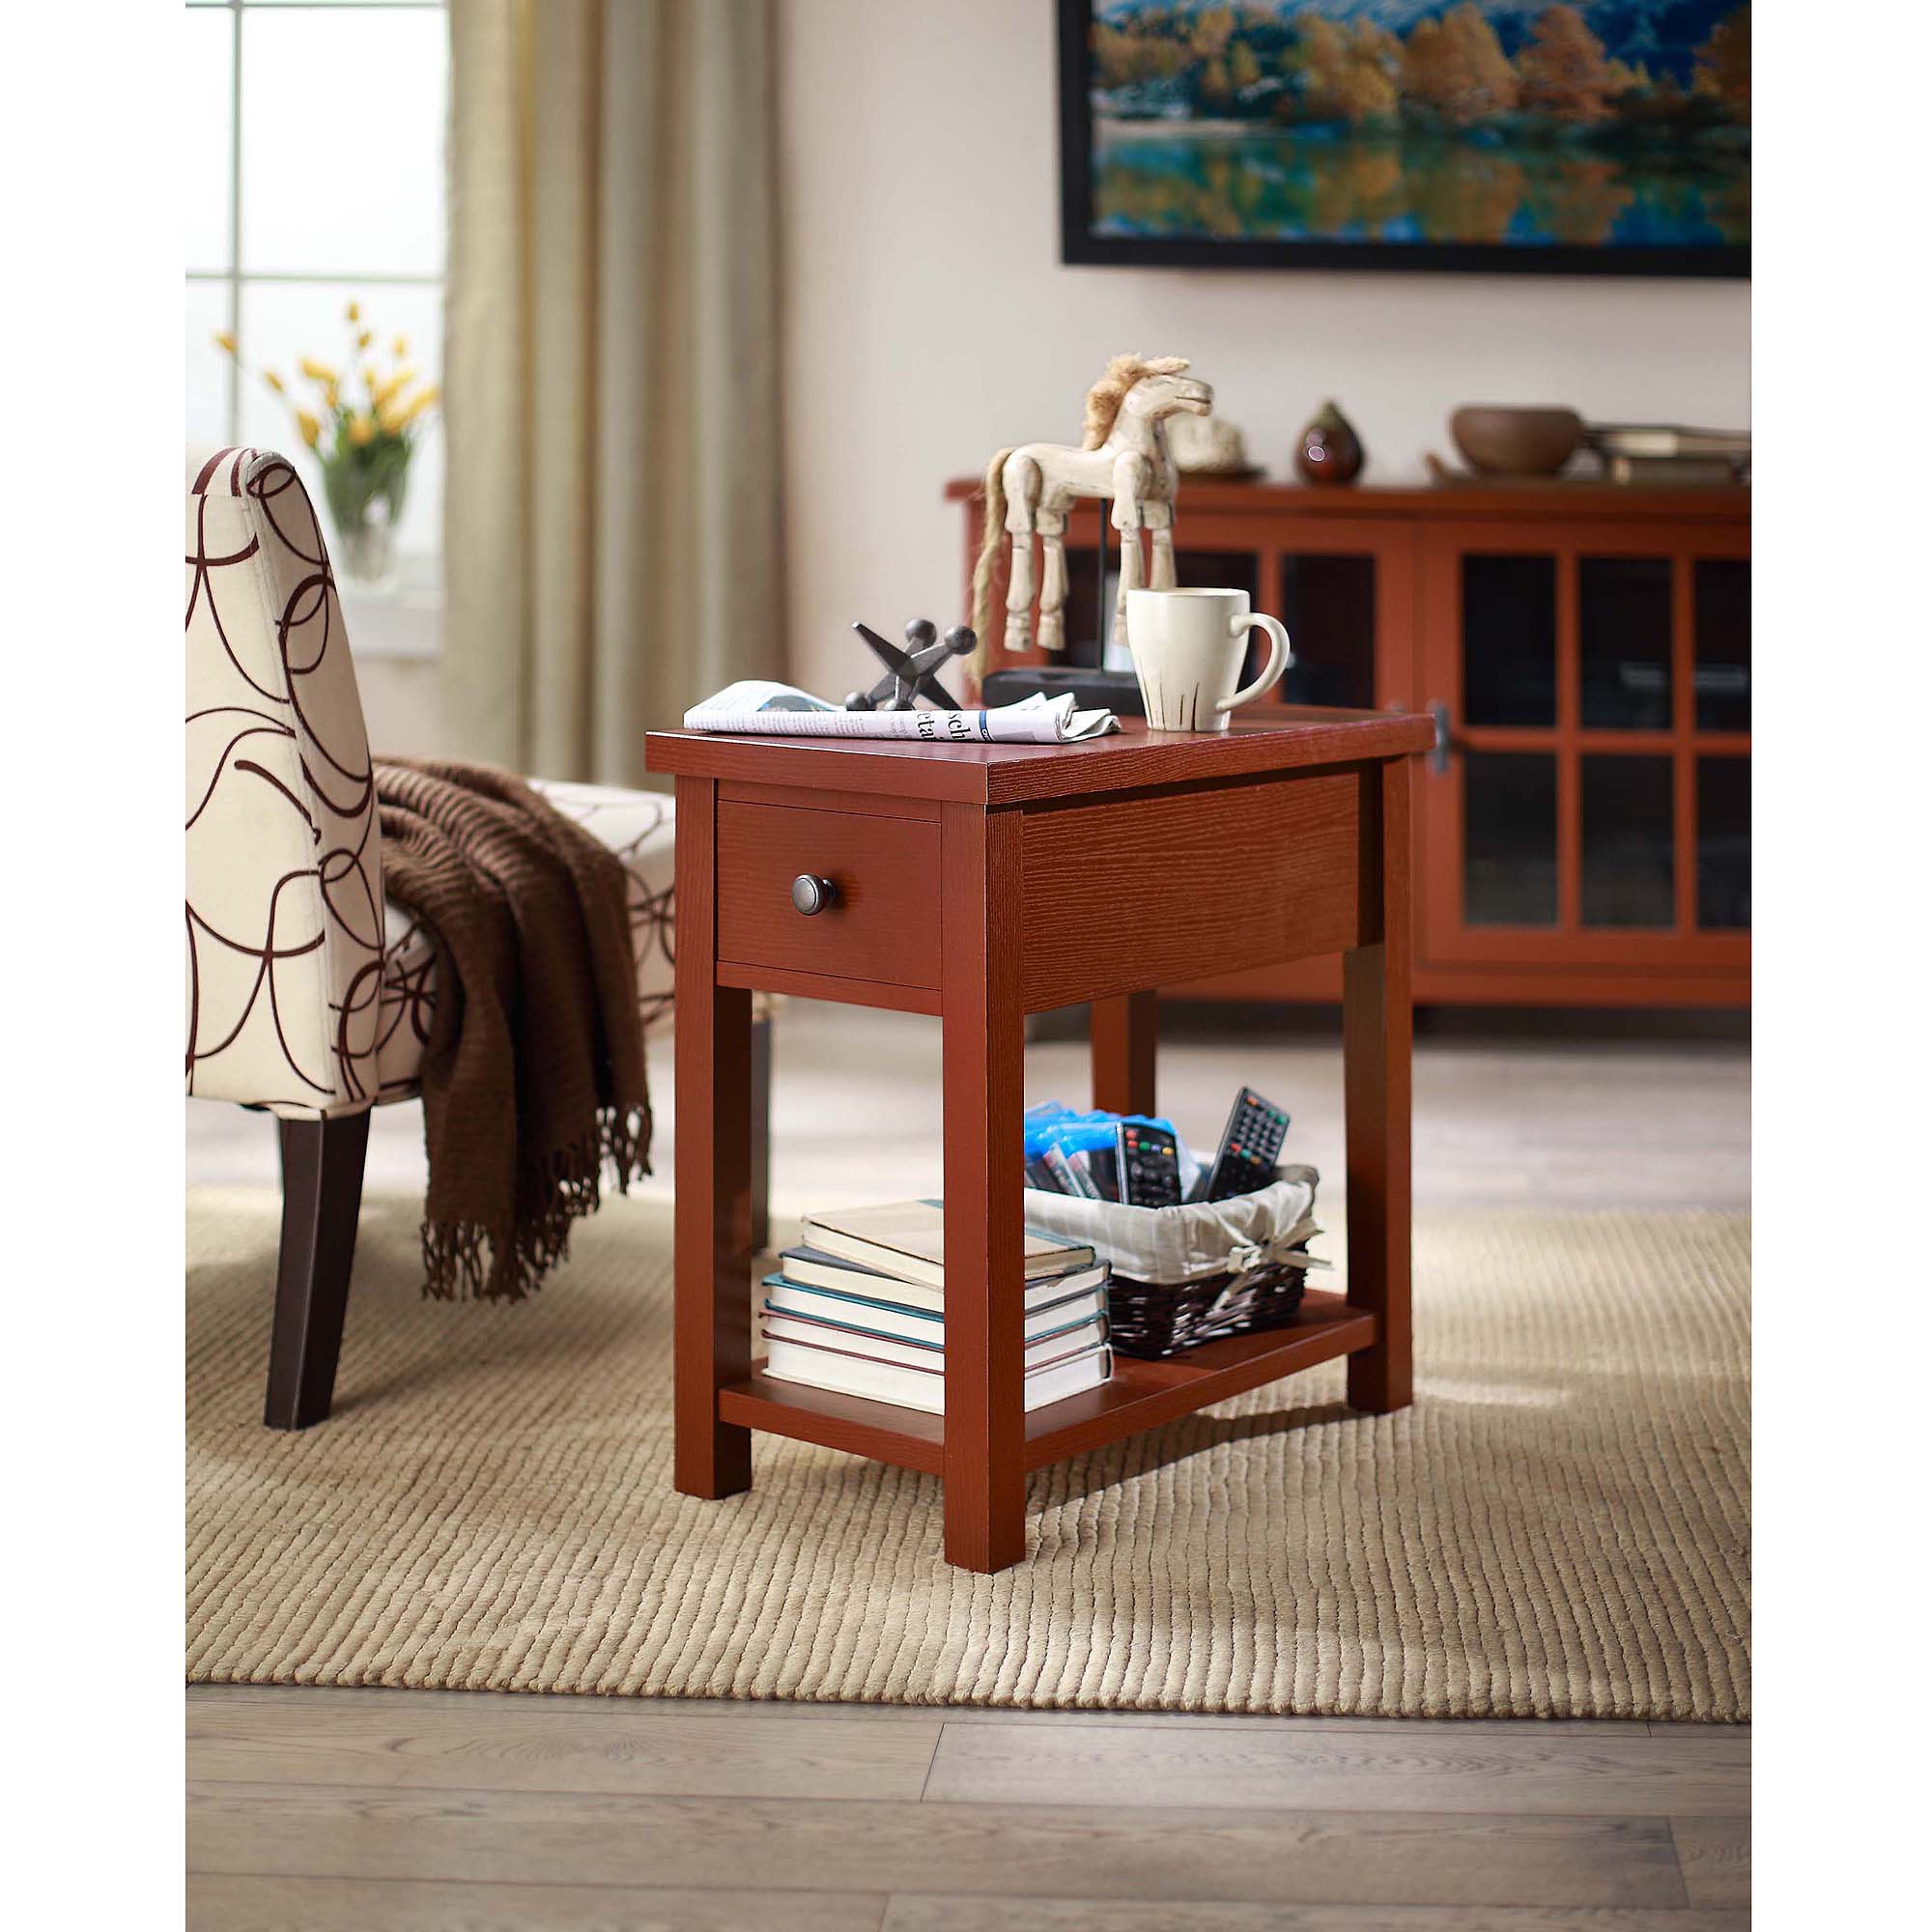 Better Homes & Gardens Oxford Square End Table with Drawer, Solid Wood, Multiple Finishes - image 2 of 5